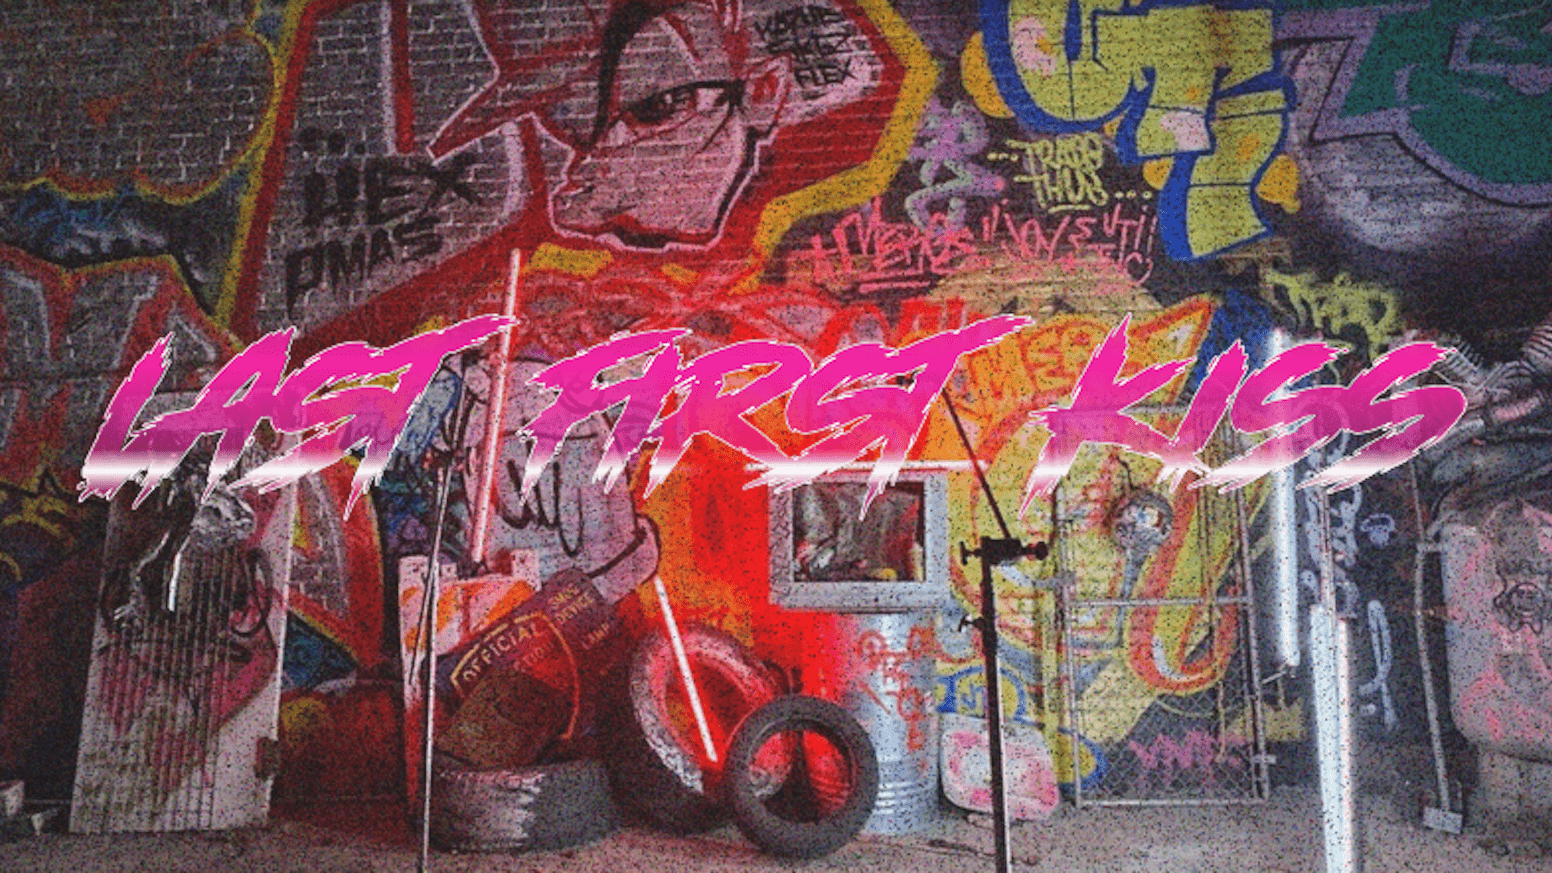 A wall covered in graffiti with the words 